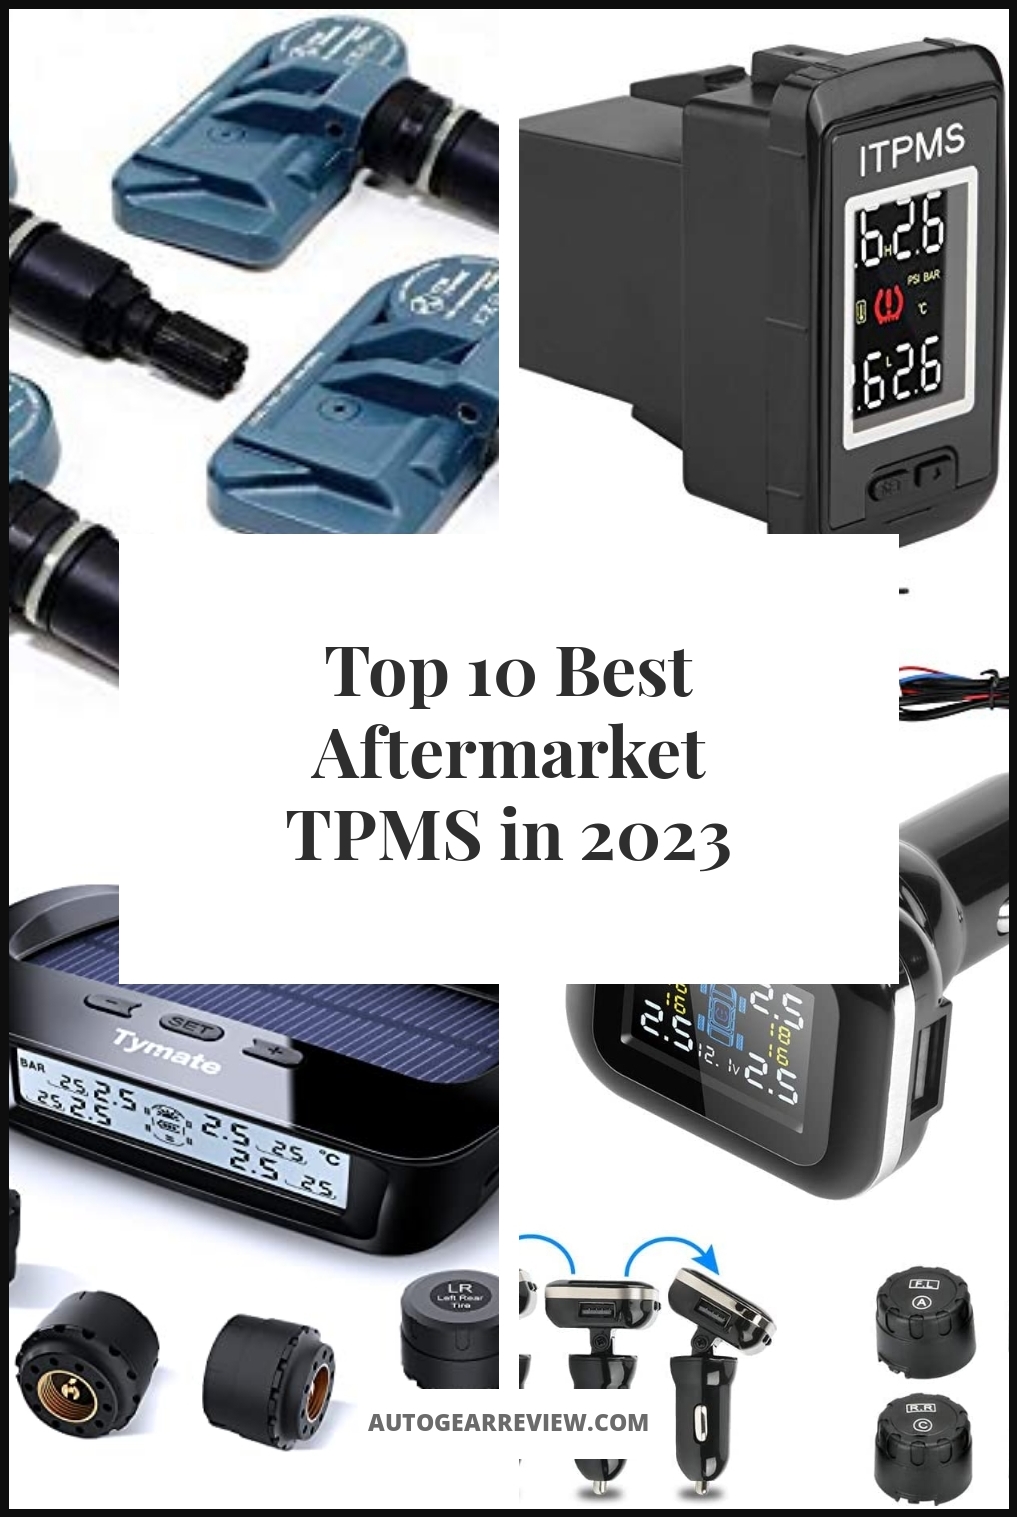 Best Aftermarket TPMS - Buying Guide